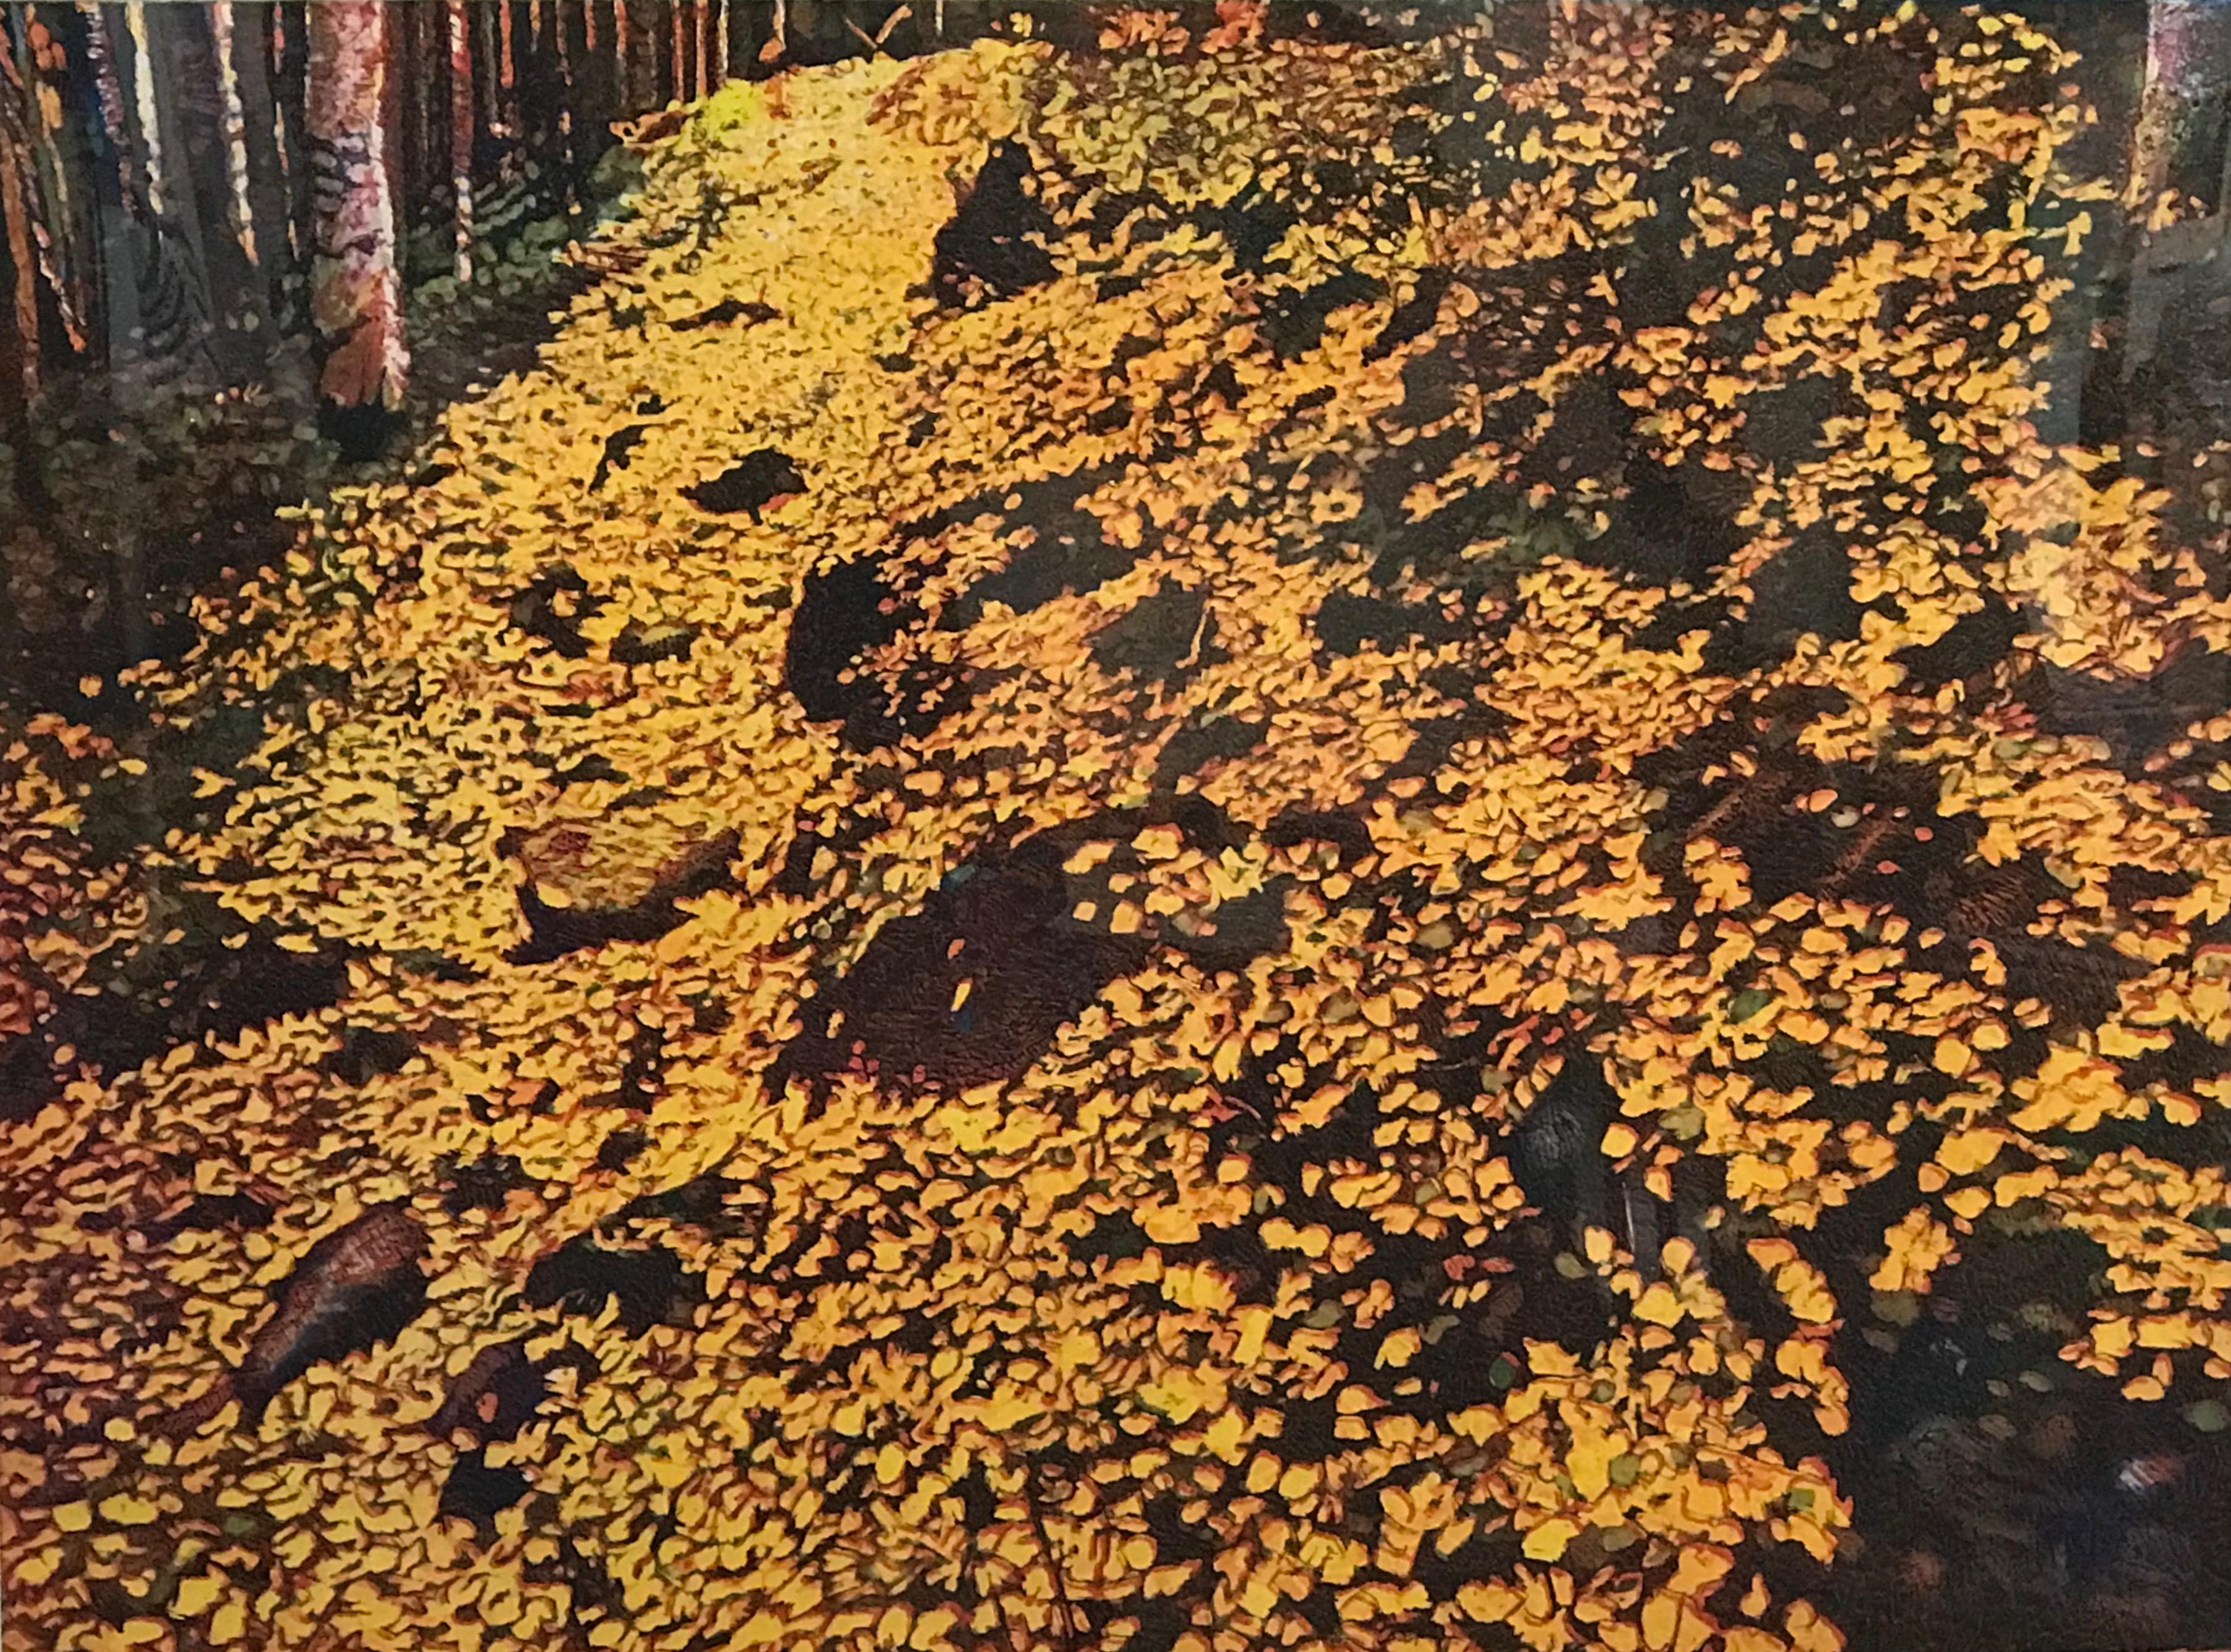 Aspen Trail- Fall, color etching,John Hogan, yellows, gold, landscape forest
hand pulled limited edition color etching 
22 x 30 paper size
18 x 24 image size
unframed
edition signed and numbered by the artist

John Hogan A graduate of Northeast